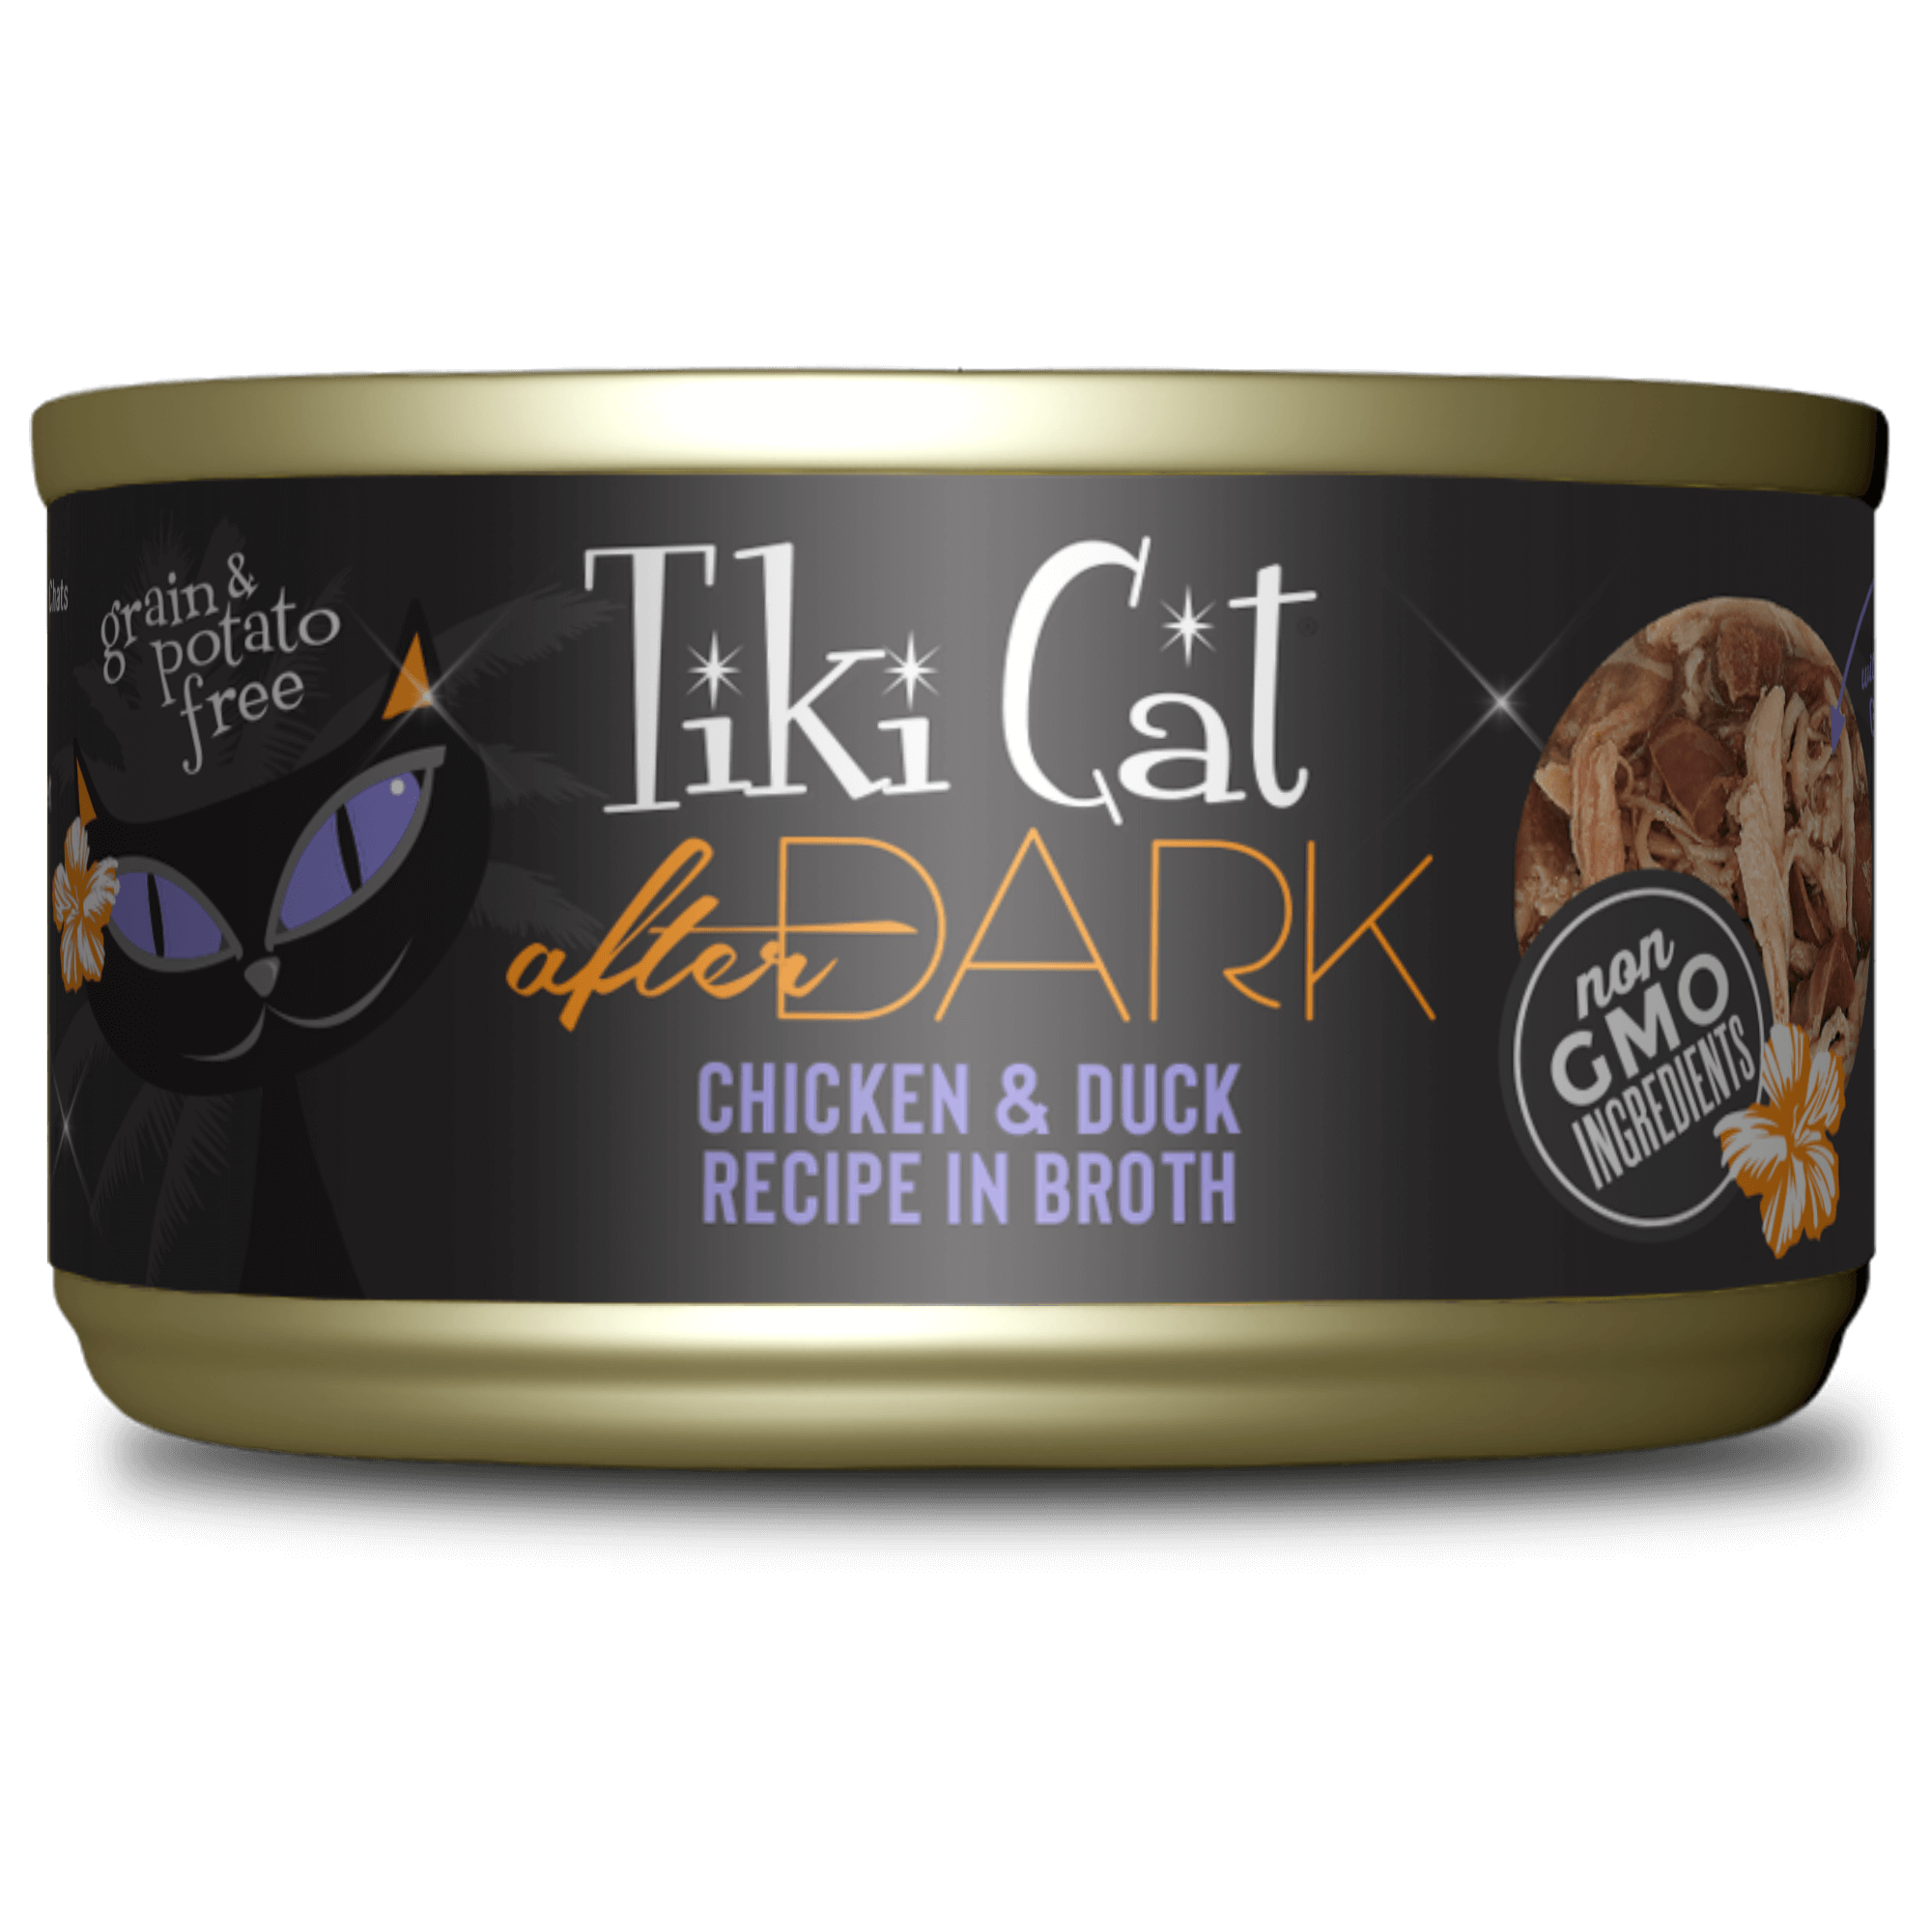 Tiki Cat - After Dark - Chicken & Duck Recipe in Broth for Cats